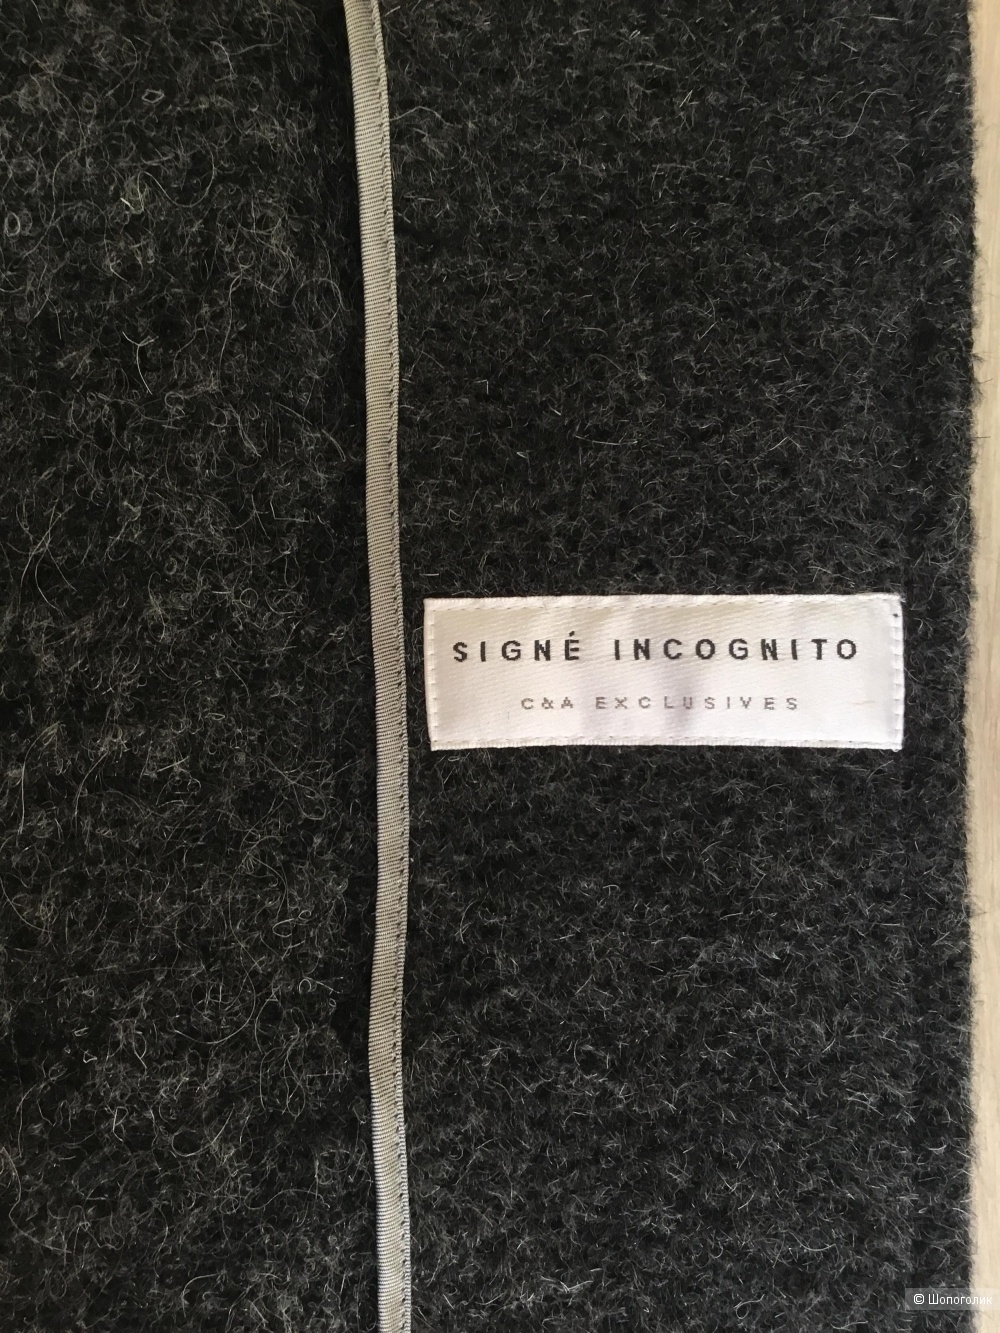 Пальто Signe Incognito C&A exclusives 46-48 размер